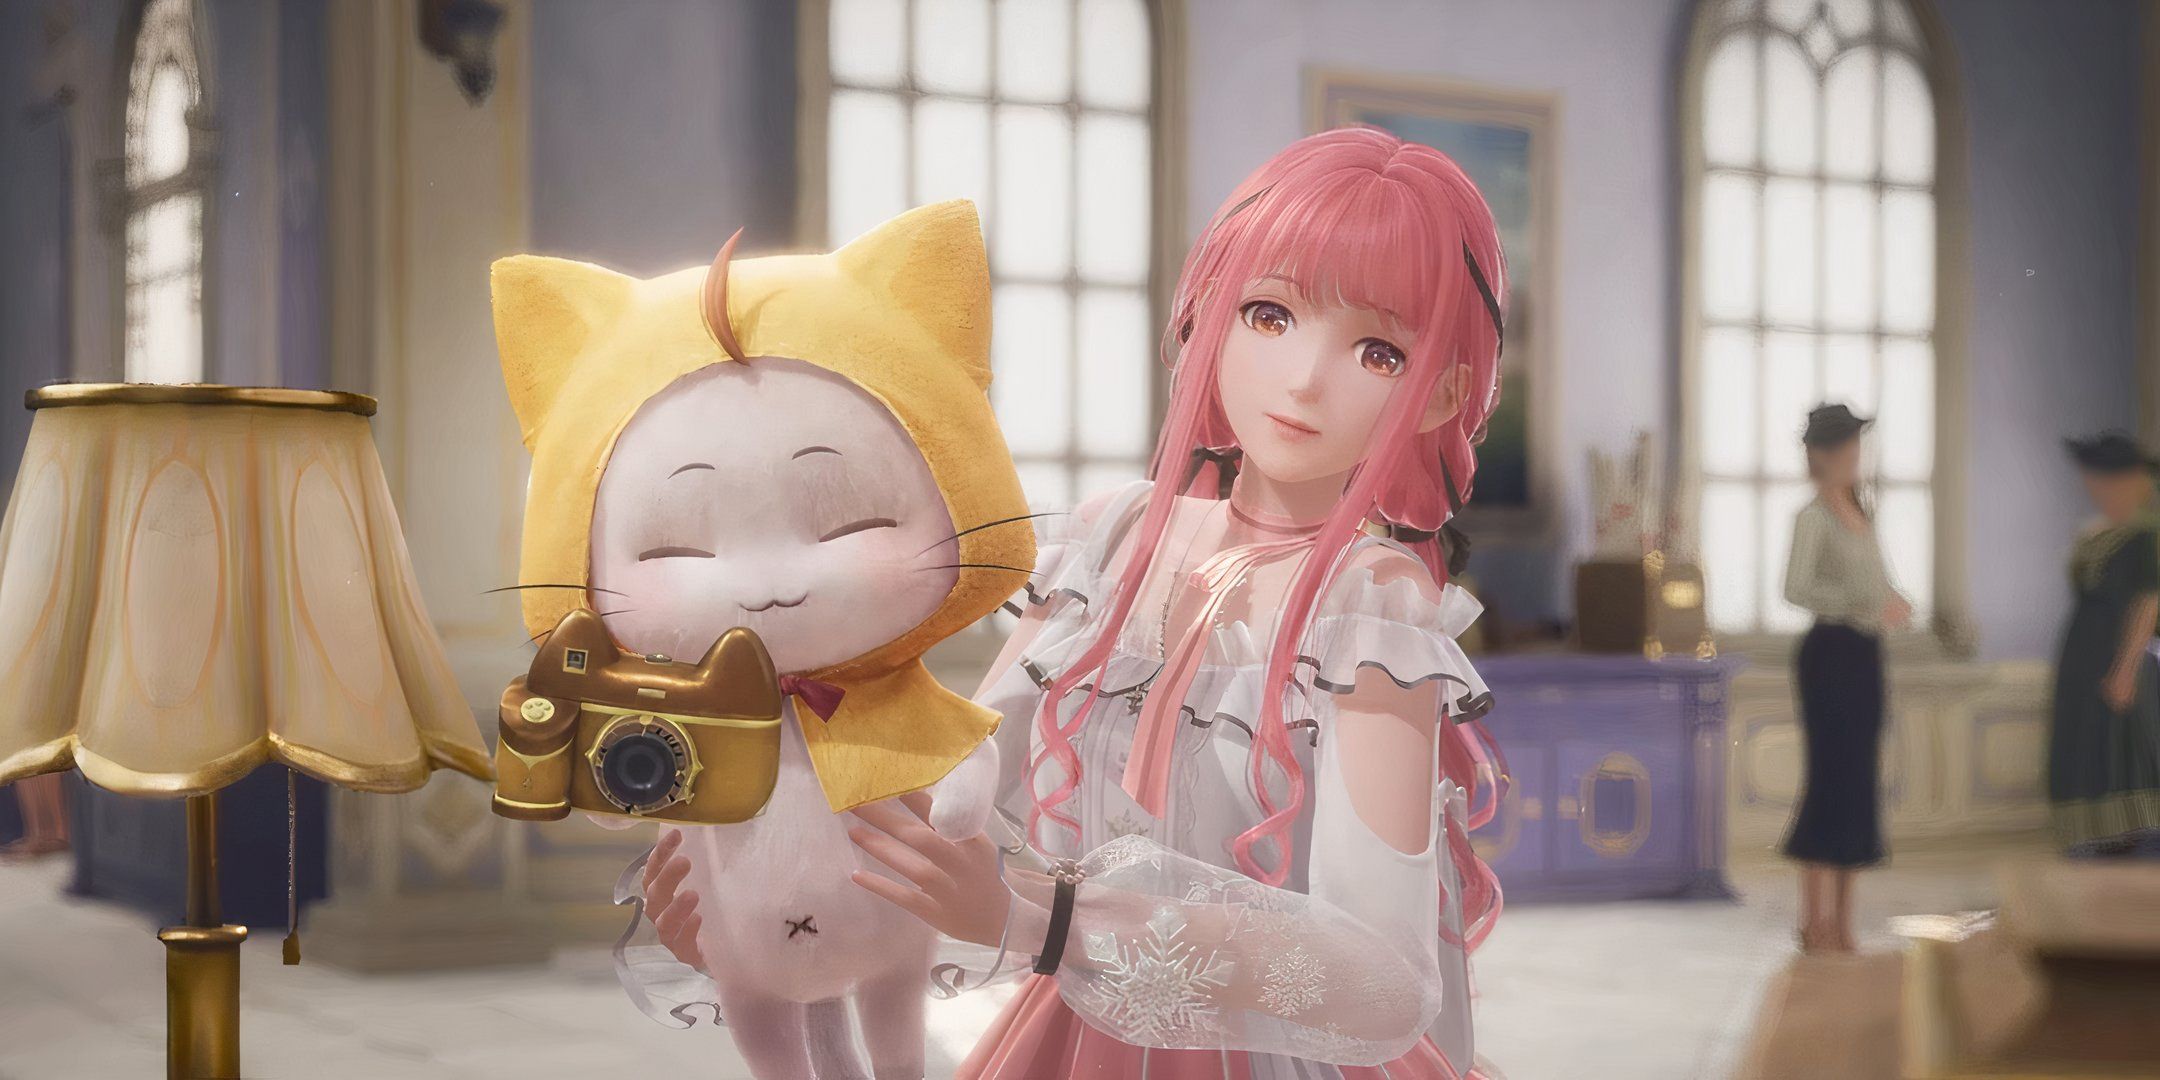 A pink haired character holding a cat that is holding a camera